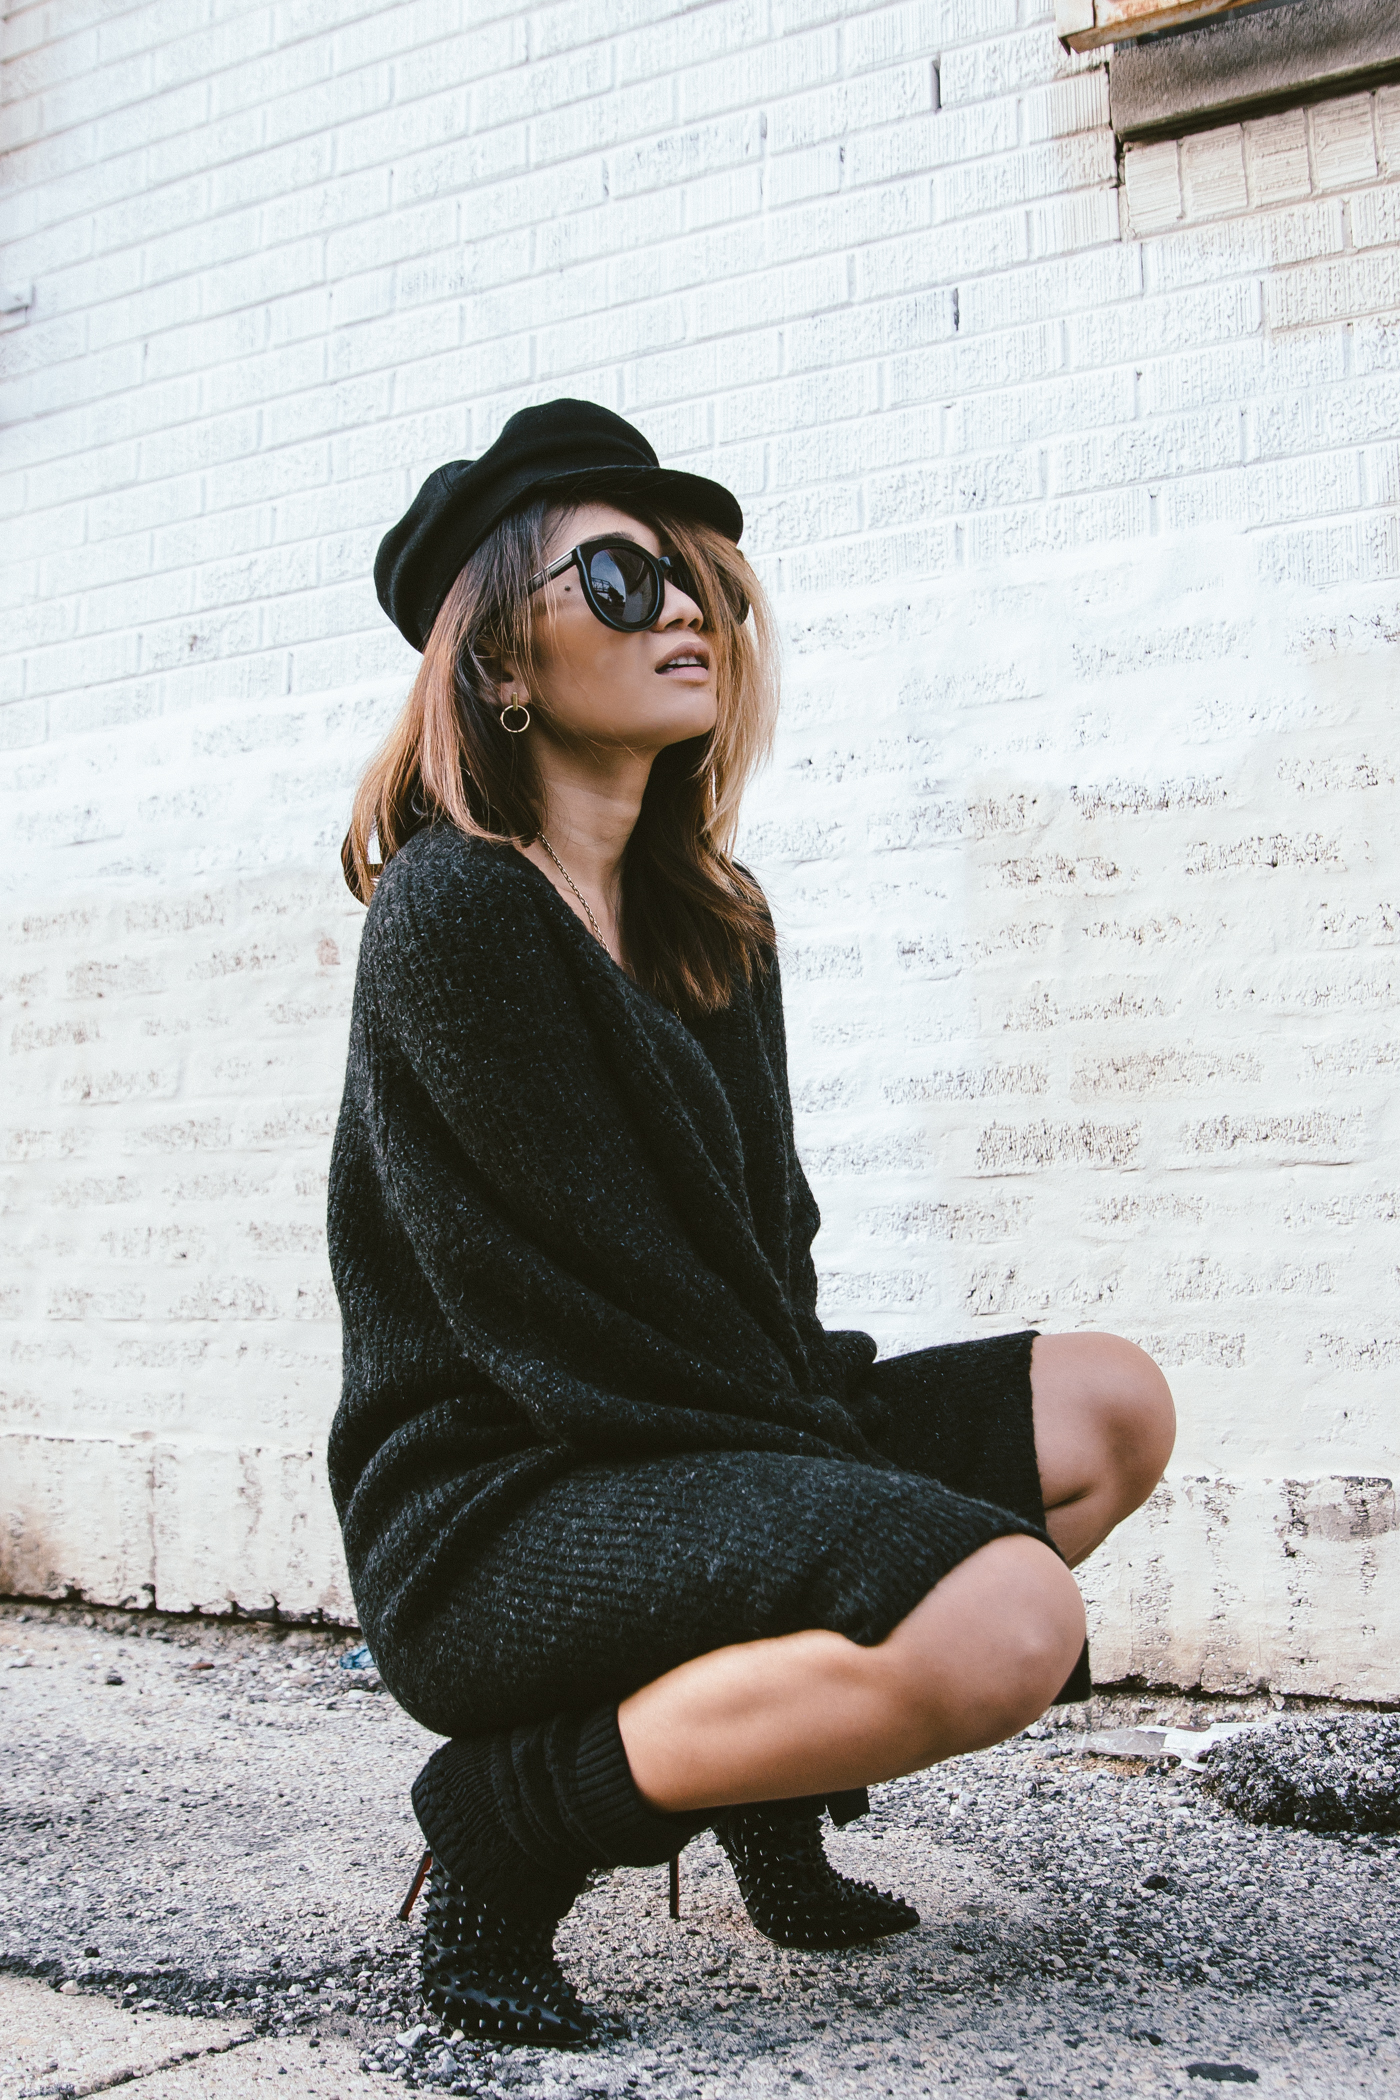 oversized sweater dress with christian louboutin ankle boots and leg warmers newsboy cap and jw anderson bow pierce bag